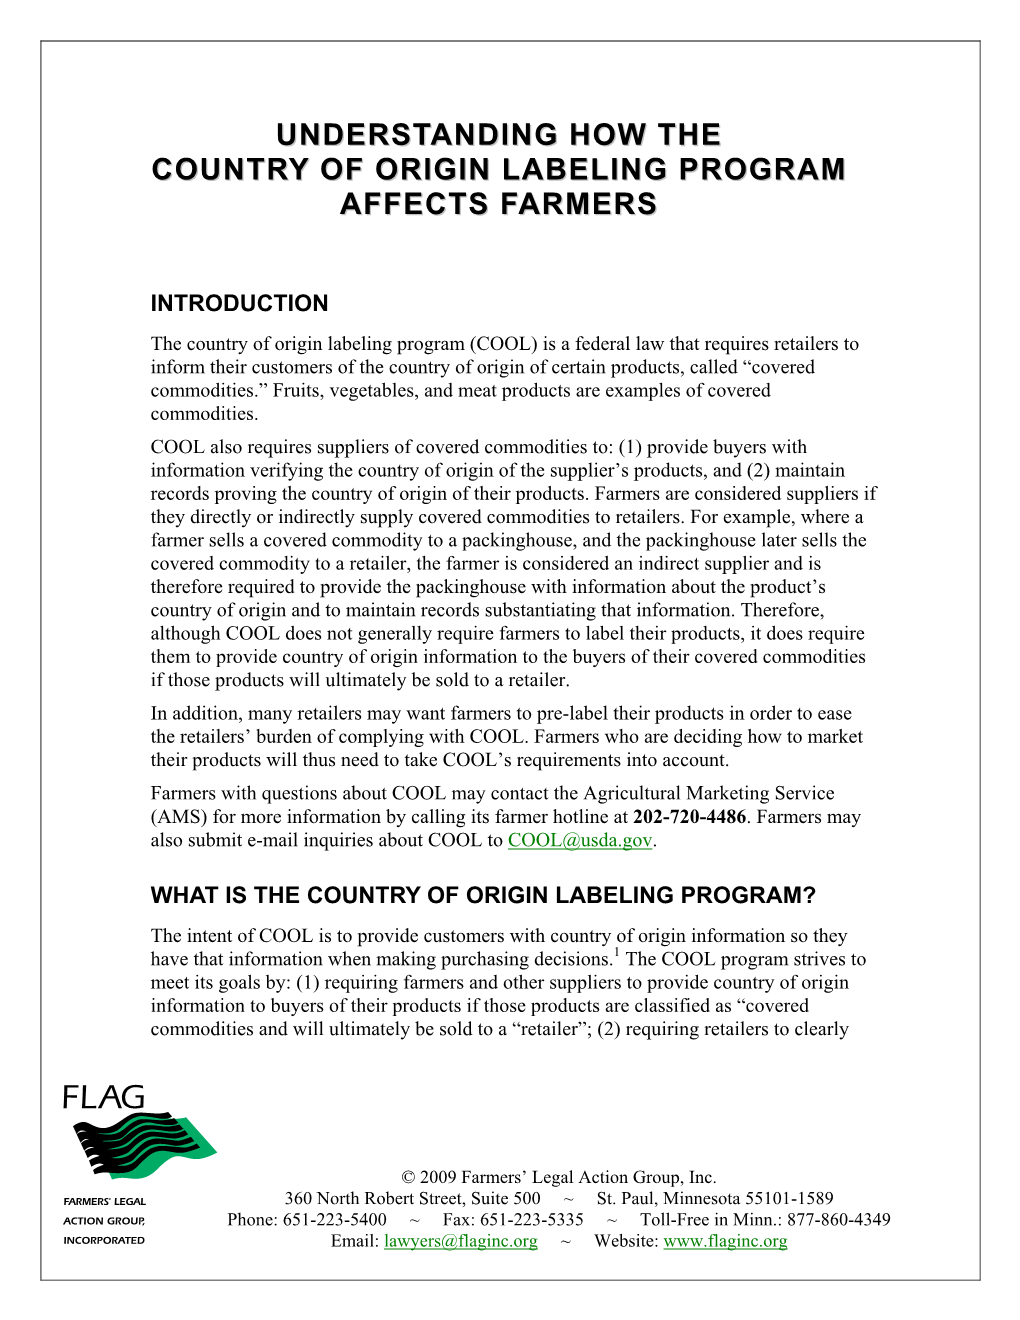 Understanding How the Country of Origin Labeling Program Affects Farmers